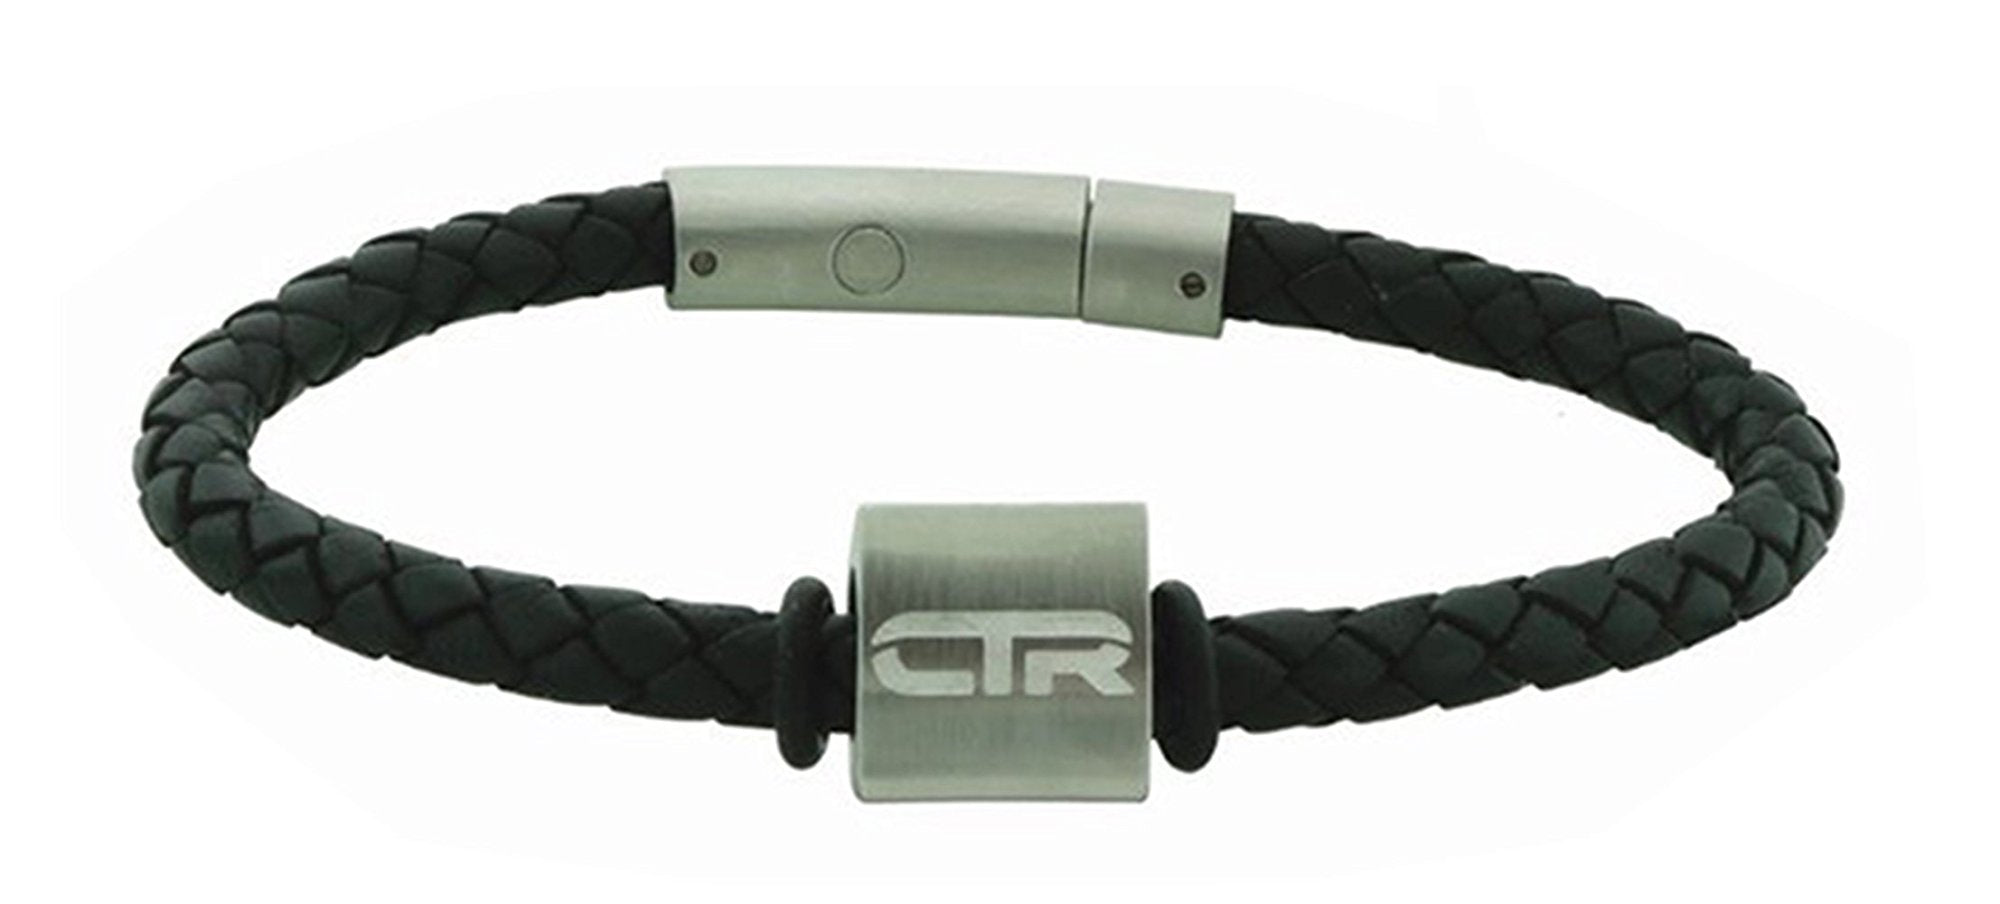 L4 Leather & Stainless Steel CTR Bracelet with Magnetic clasp Suface